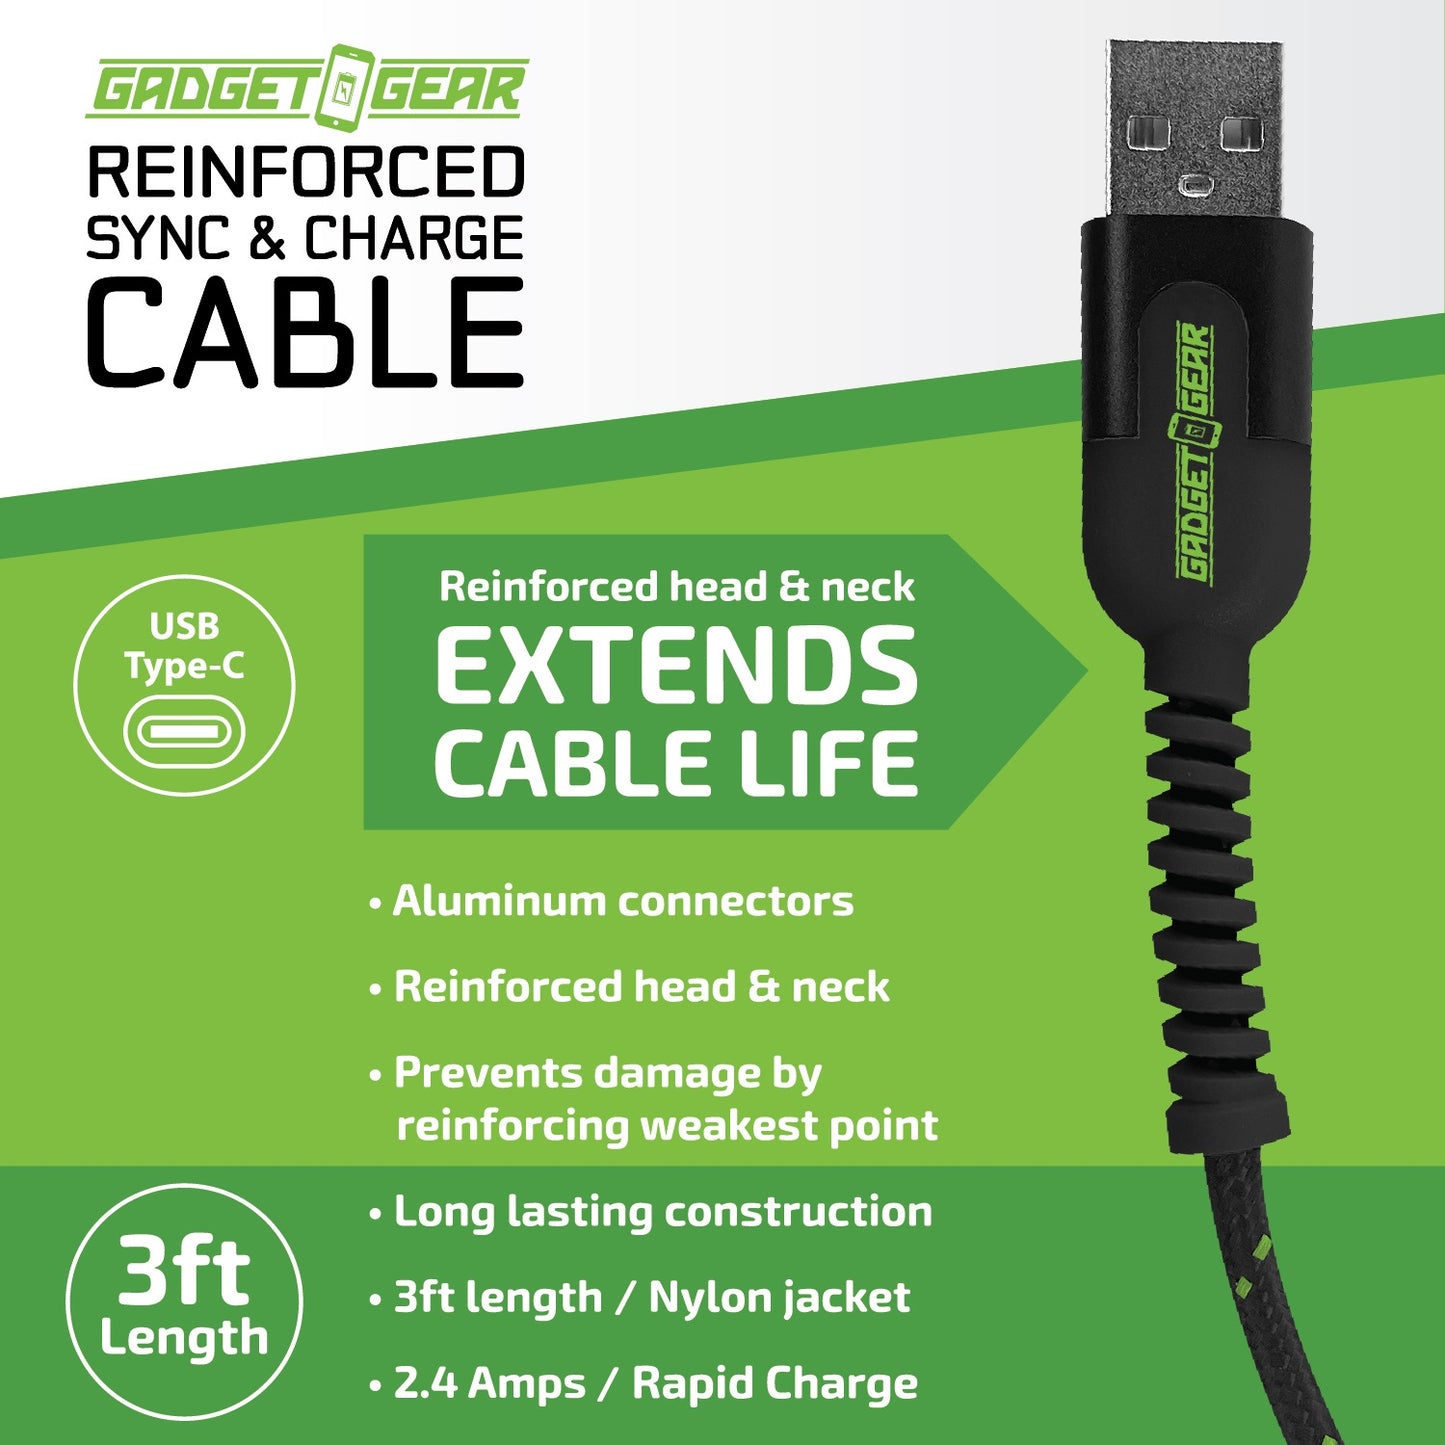 ITEM NUMBER 023971L REINFORCED GG CABLE TYPE C - STORE SURPLUS NO DISPLAY 4 PIECES PER PACK